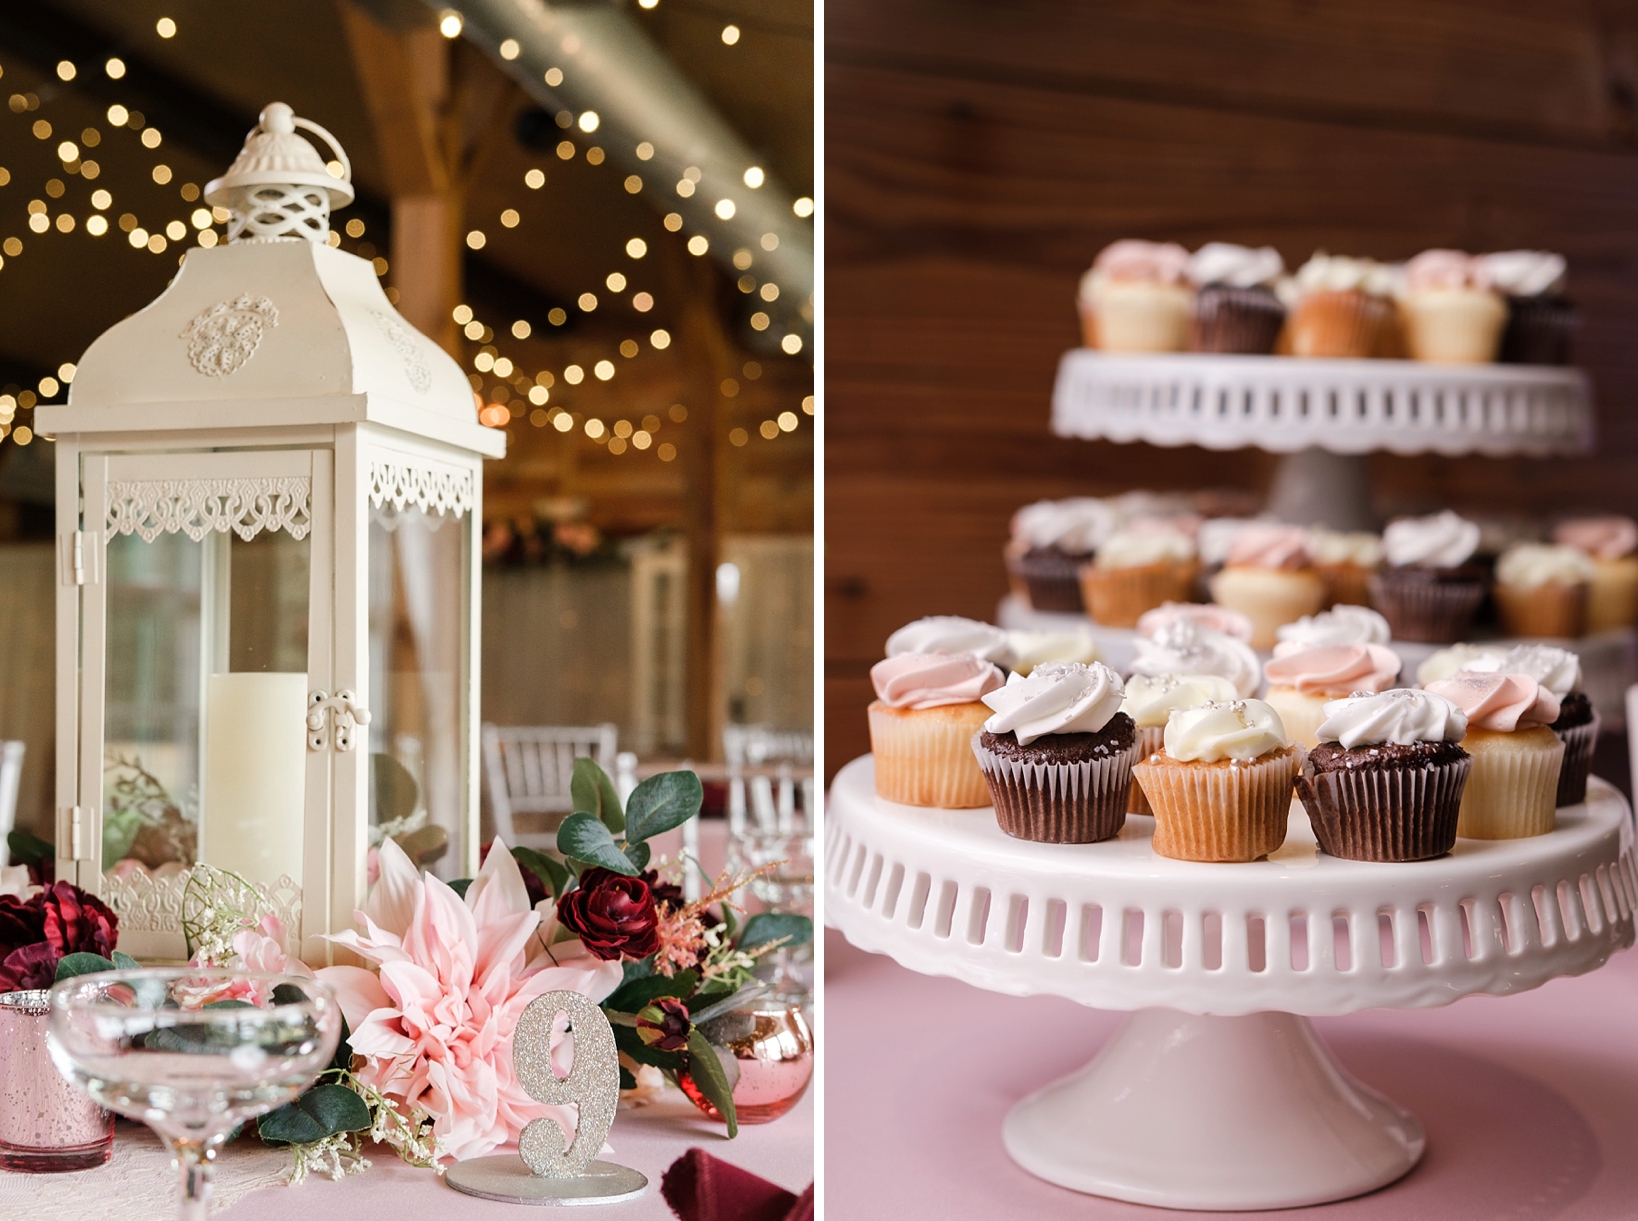 Small cupcakes sit on a stand and the string lights fill the ceiling in the barn